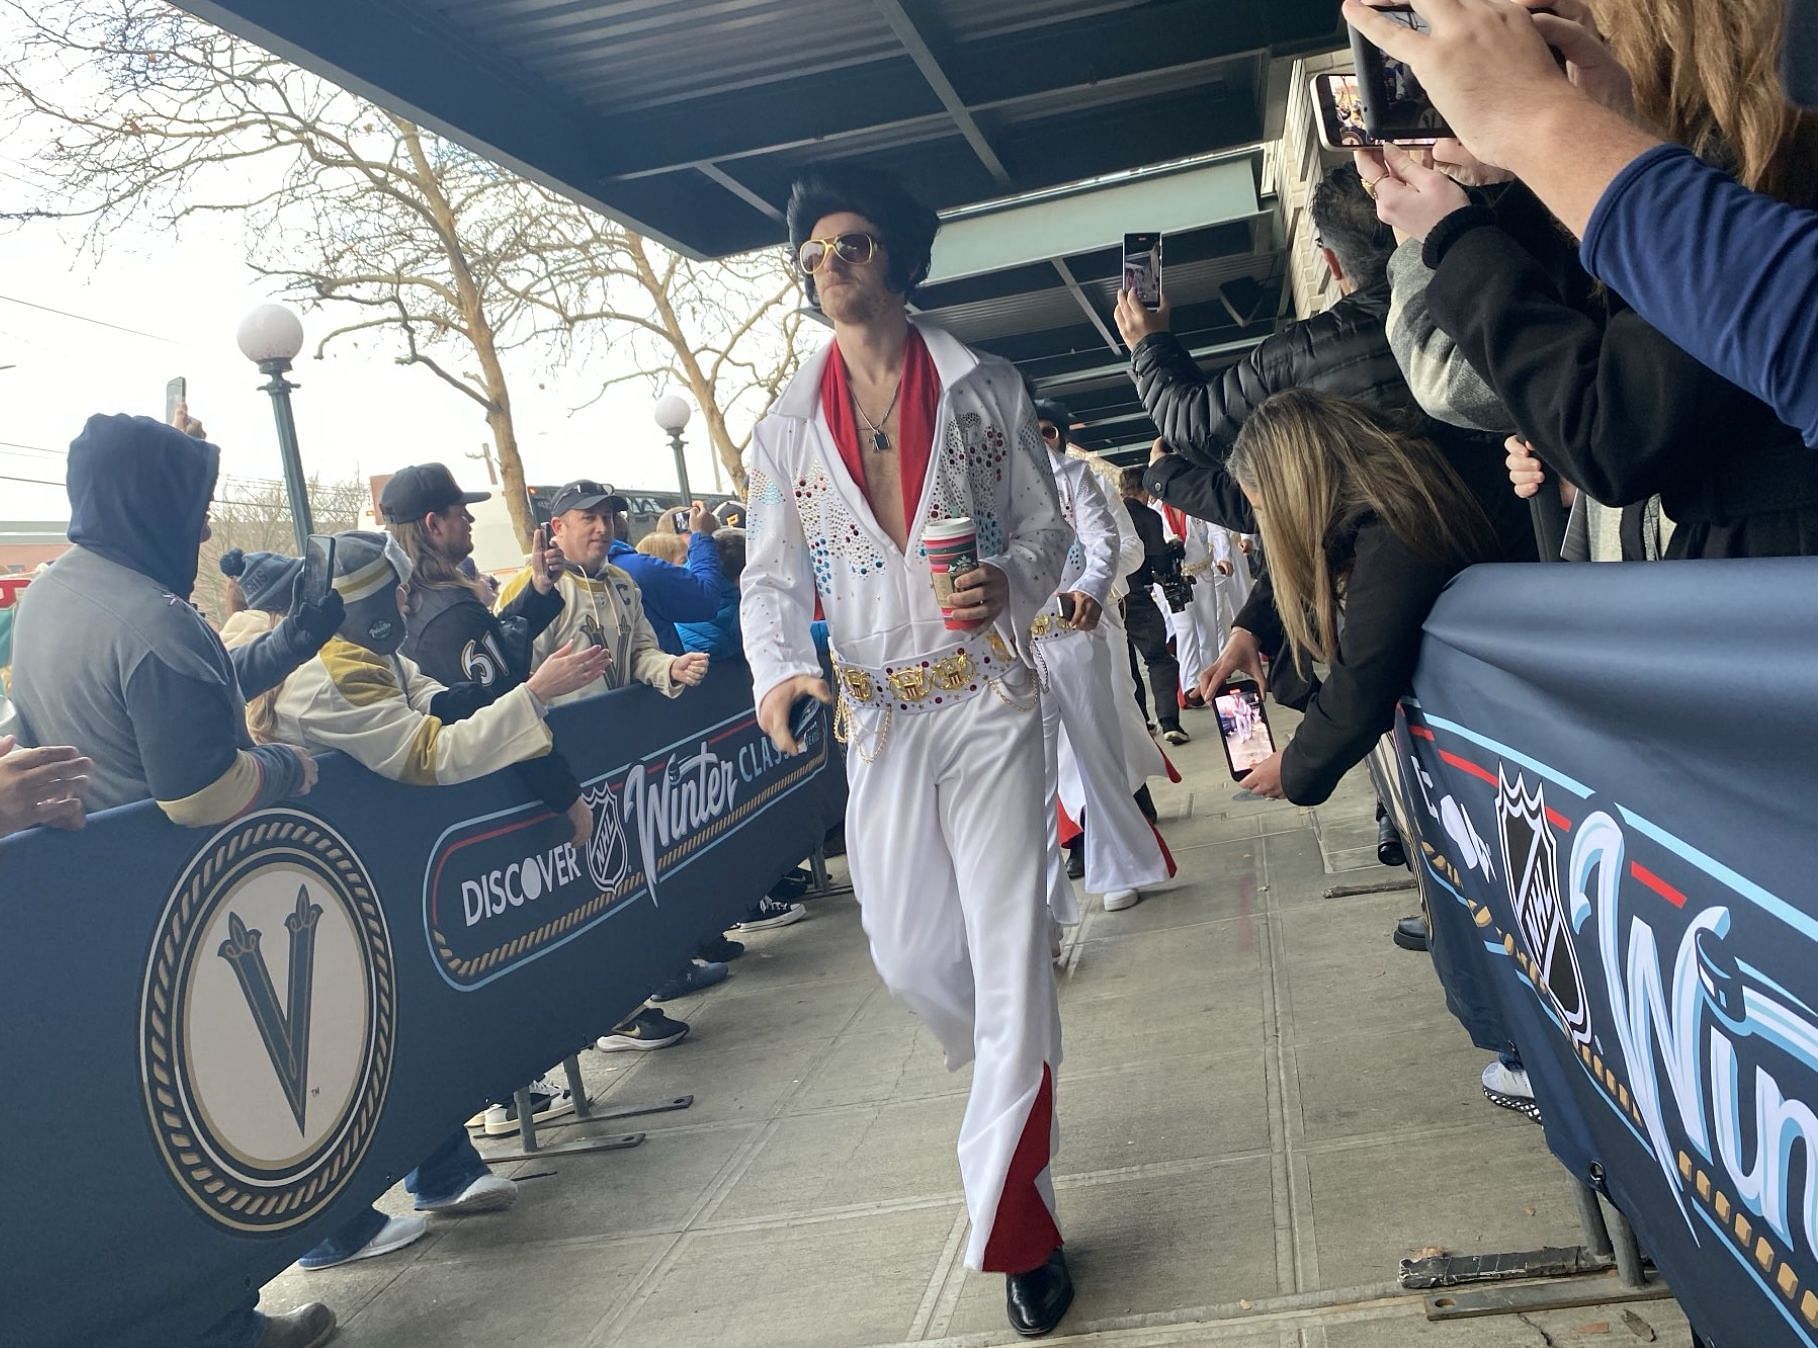 IN PHOTOS: Golden Knights arrive in style for Winter Classic in Elvis Presley costumes 